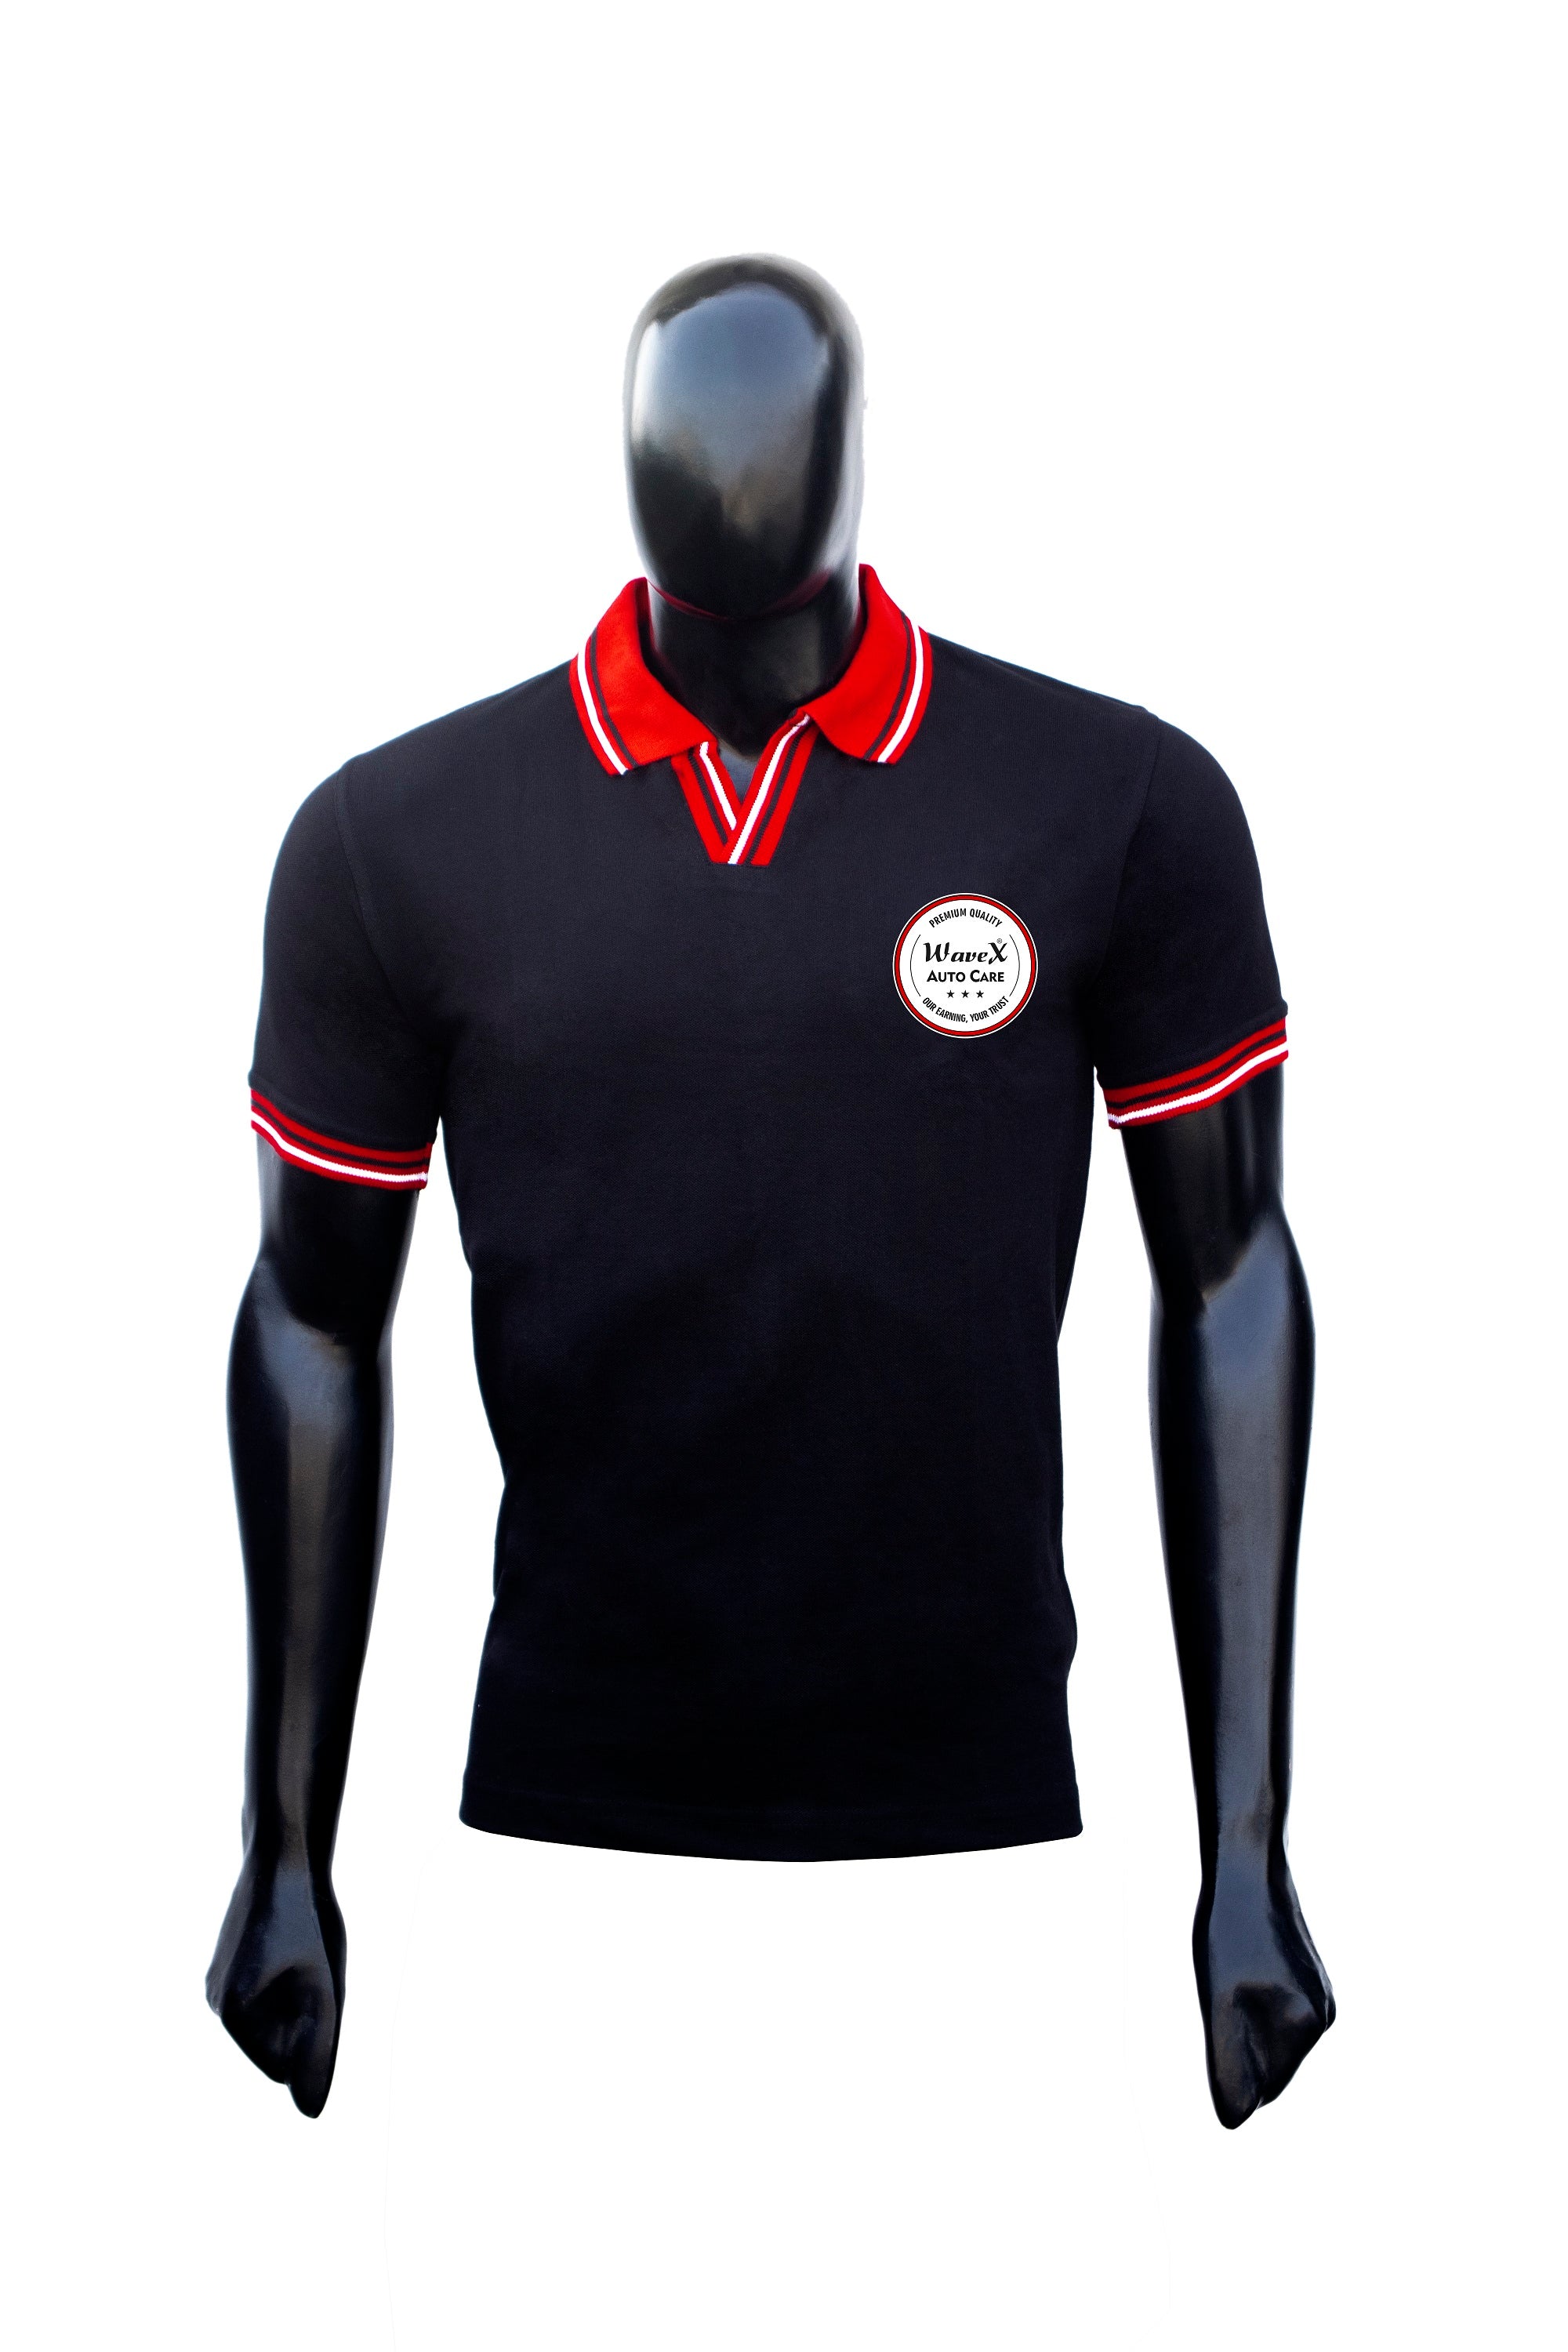 WaveX Men's Classic Fit Short Sleeve Casual 100% Cotton Polo Detailing T Shirt| Red and Black.